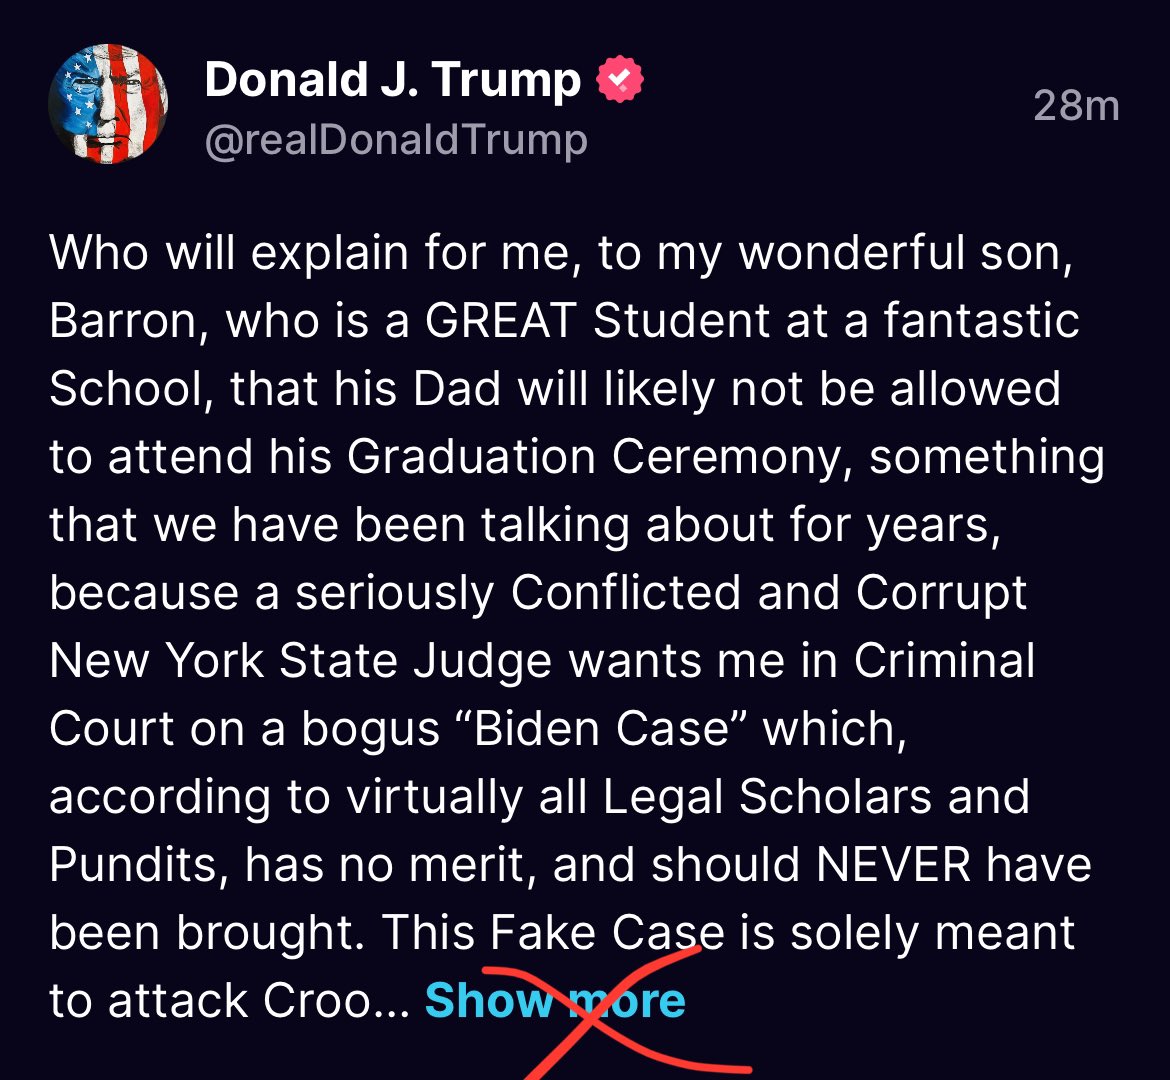 Just tell Barron you’re on trial for election interference for sleeping with Stormy Daniels while his momma was pregnant with him.